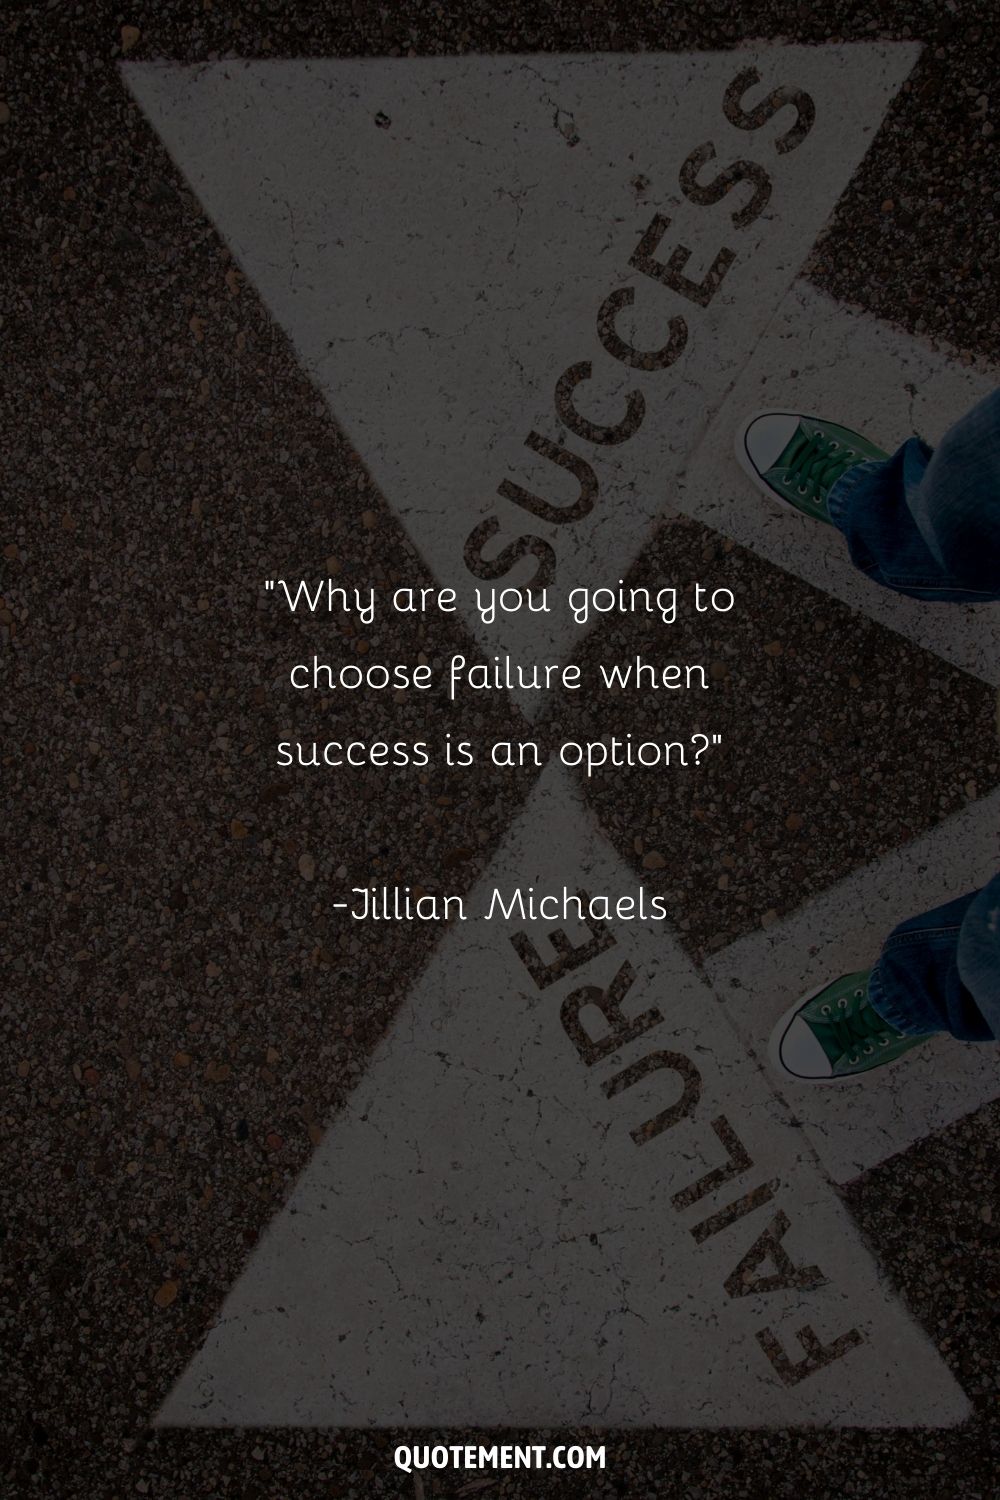 “Why are you going to choose failure when success is an option” ― Jillian Michaels